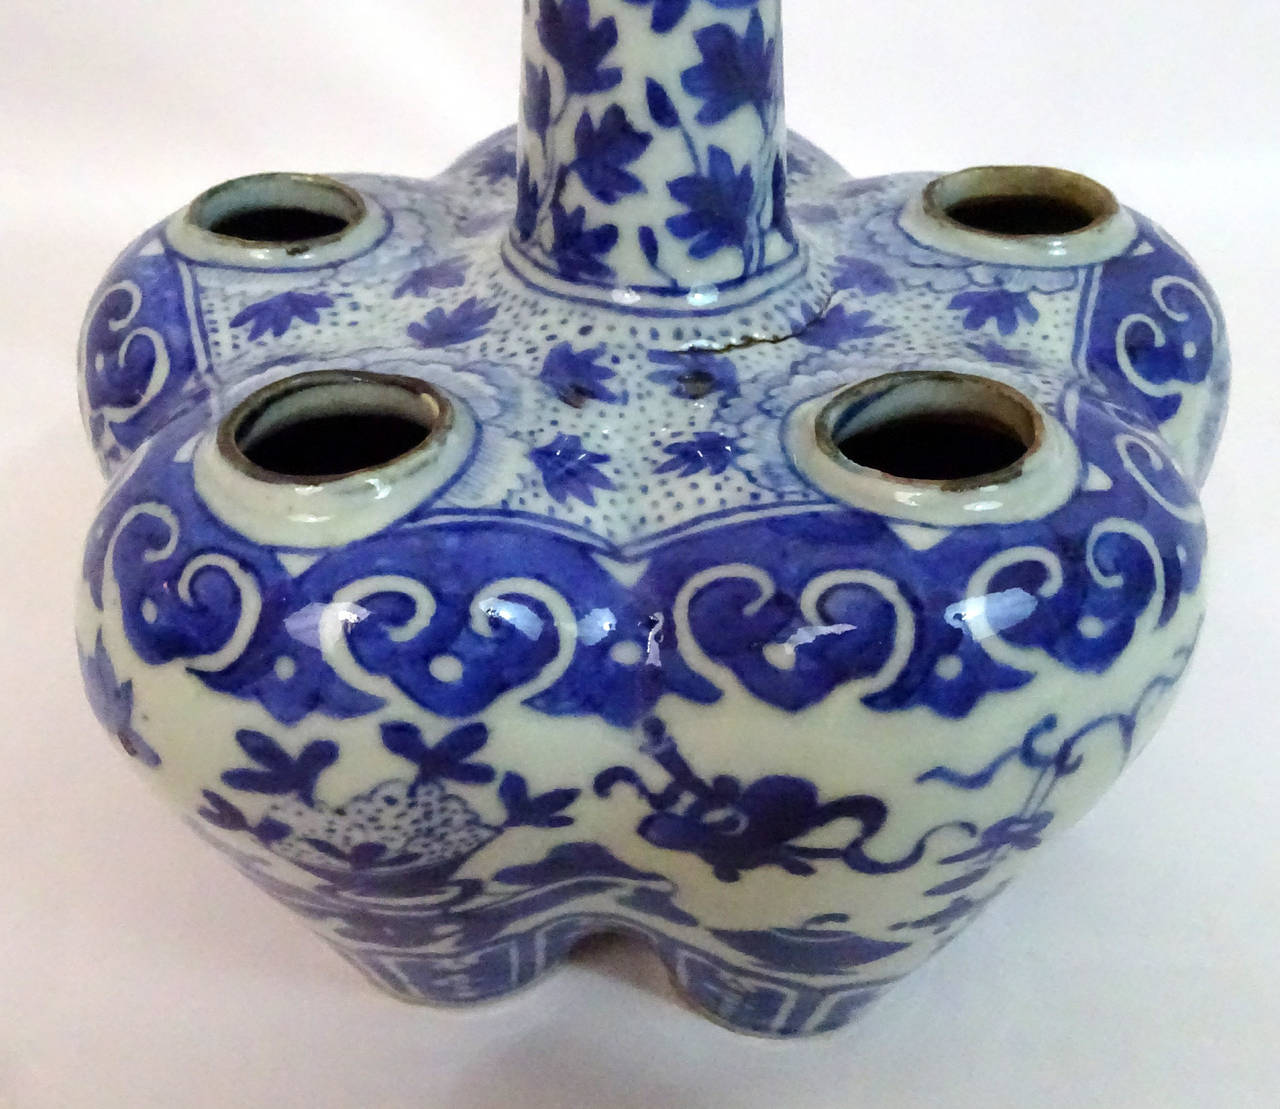 19th Century 19th c. Chinese Blue and White Porcelain Tulipiere